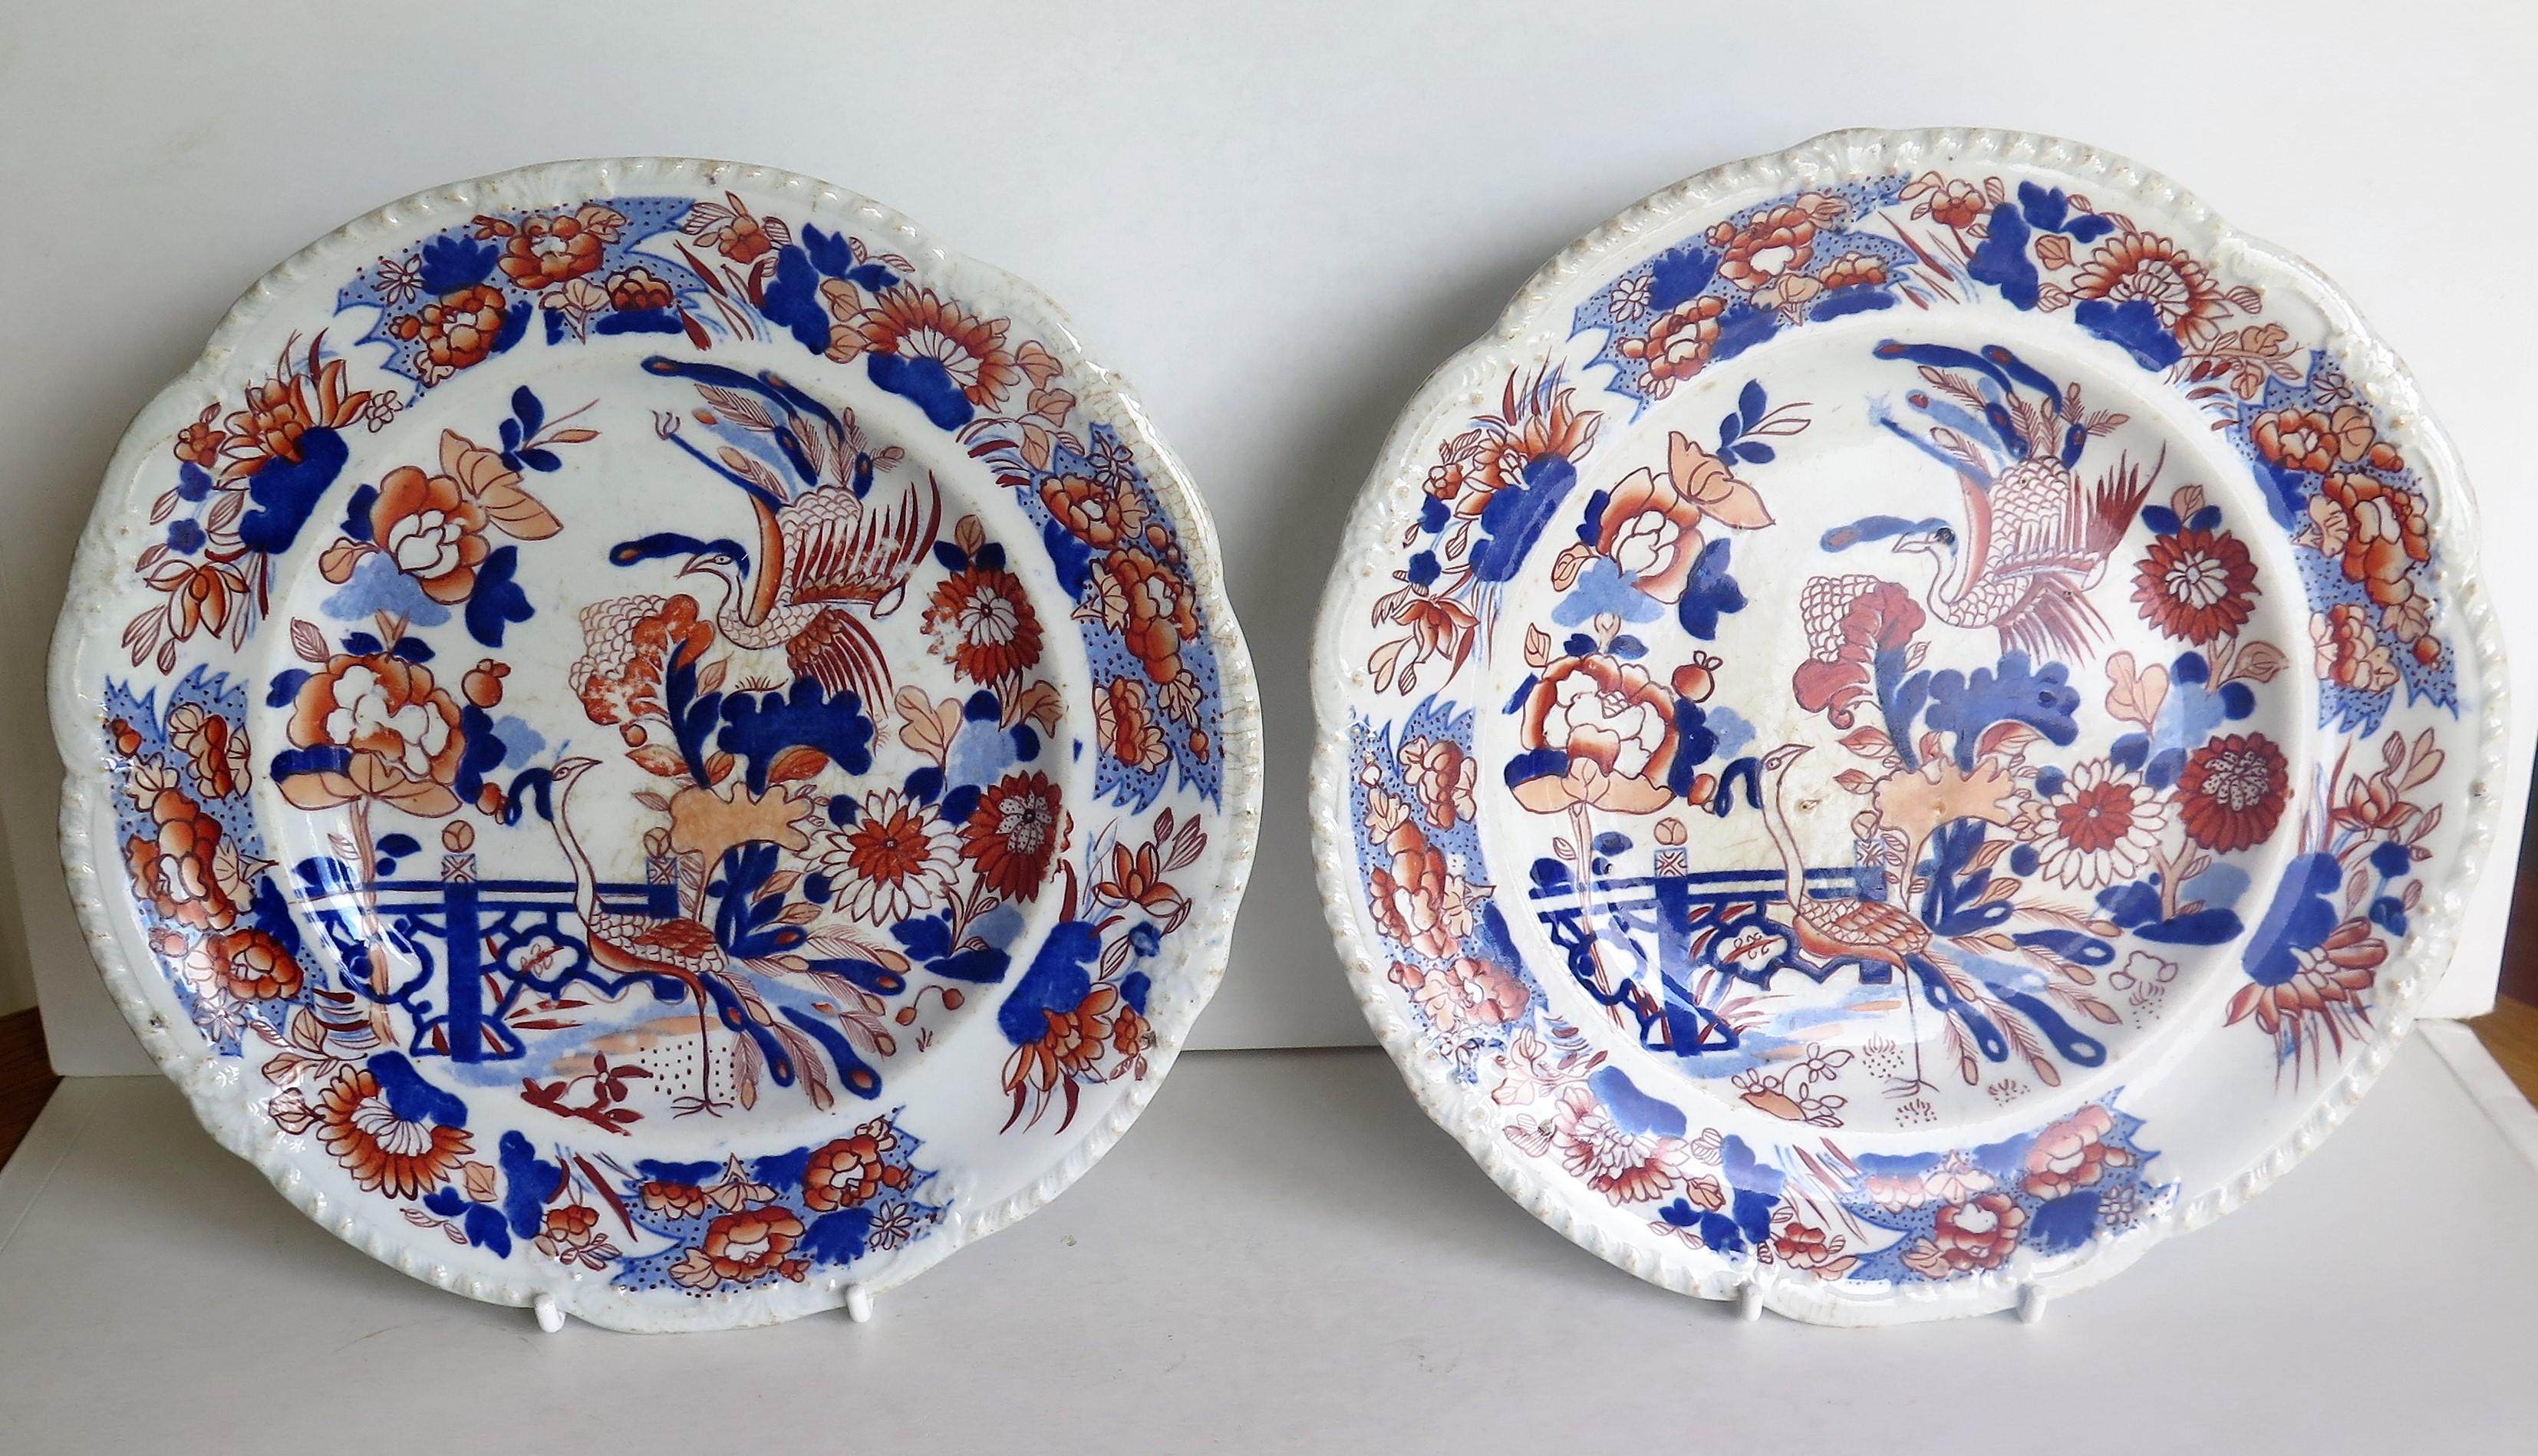 These are a very decorative pair of Mason's Ironstone pottery desert plates or dishes produced by the Mason's factory at Lane Delph, Staffordshire, England, circa 1815.

The plates are circular with shaped rims having a moulded edge design.

The